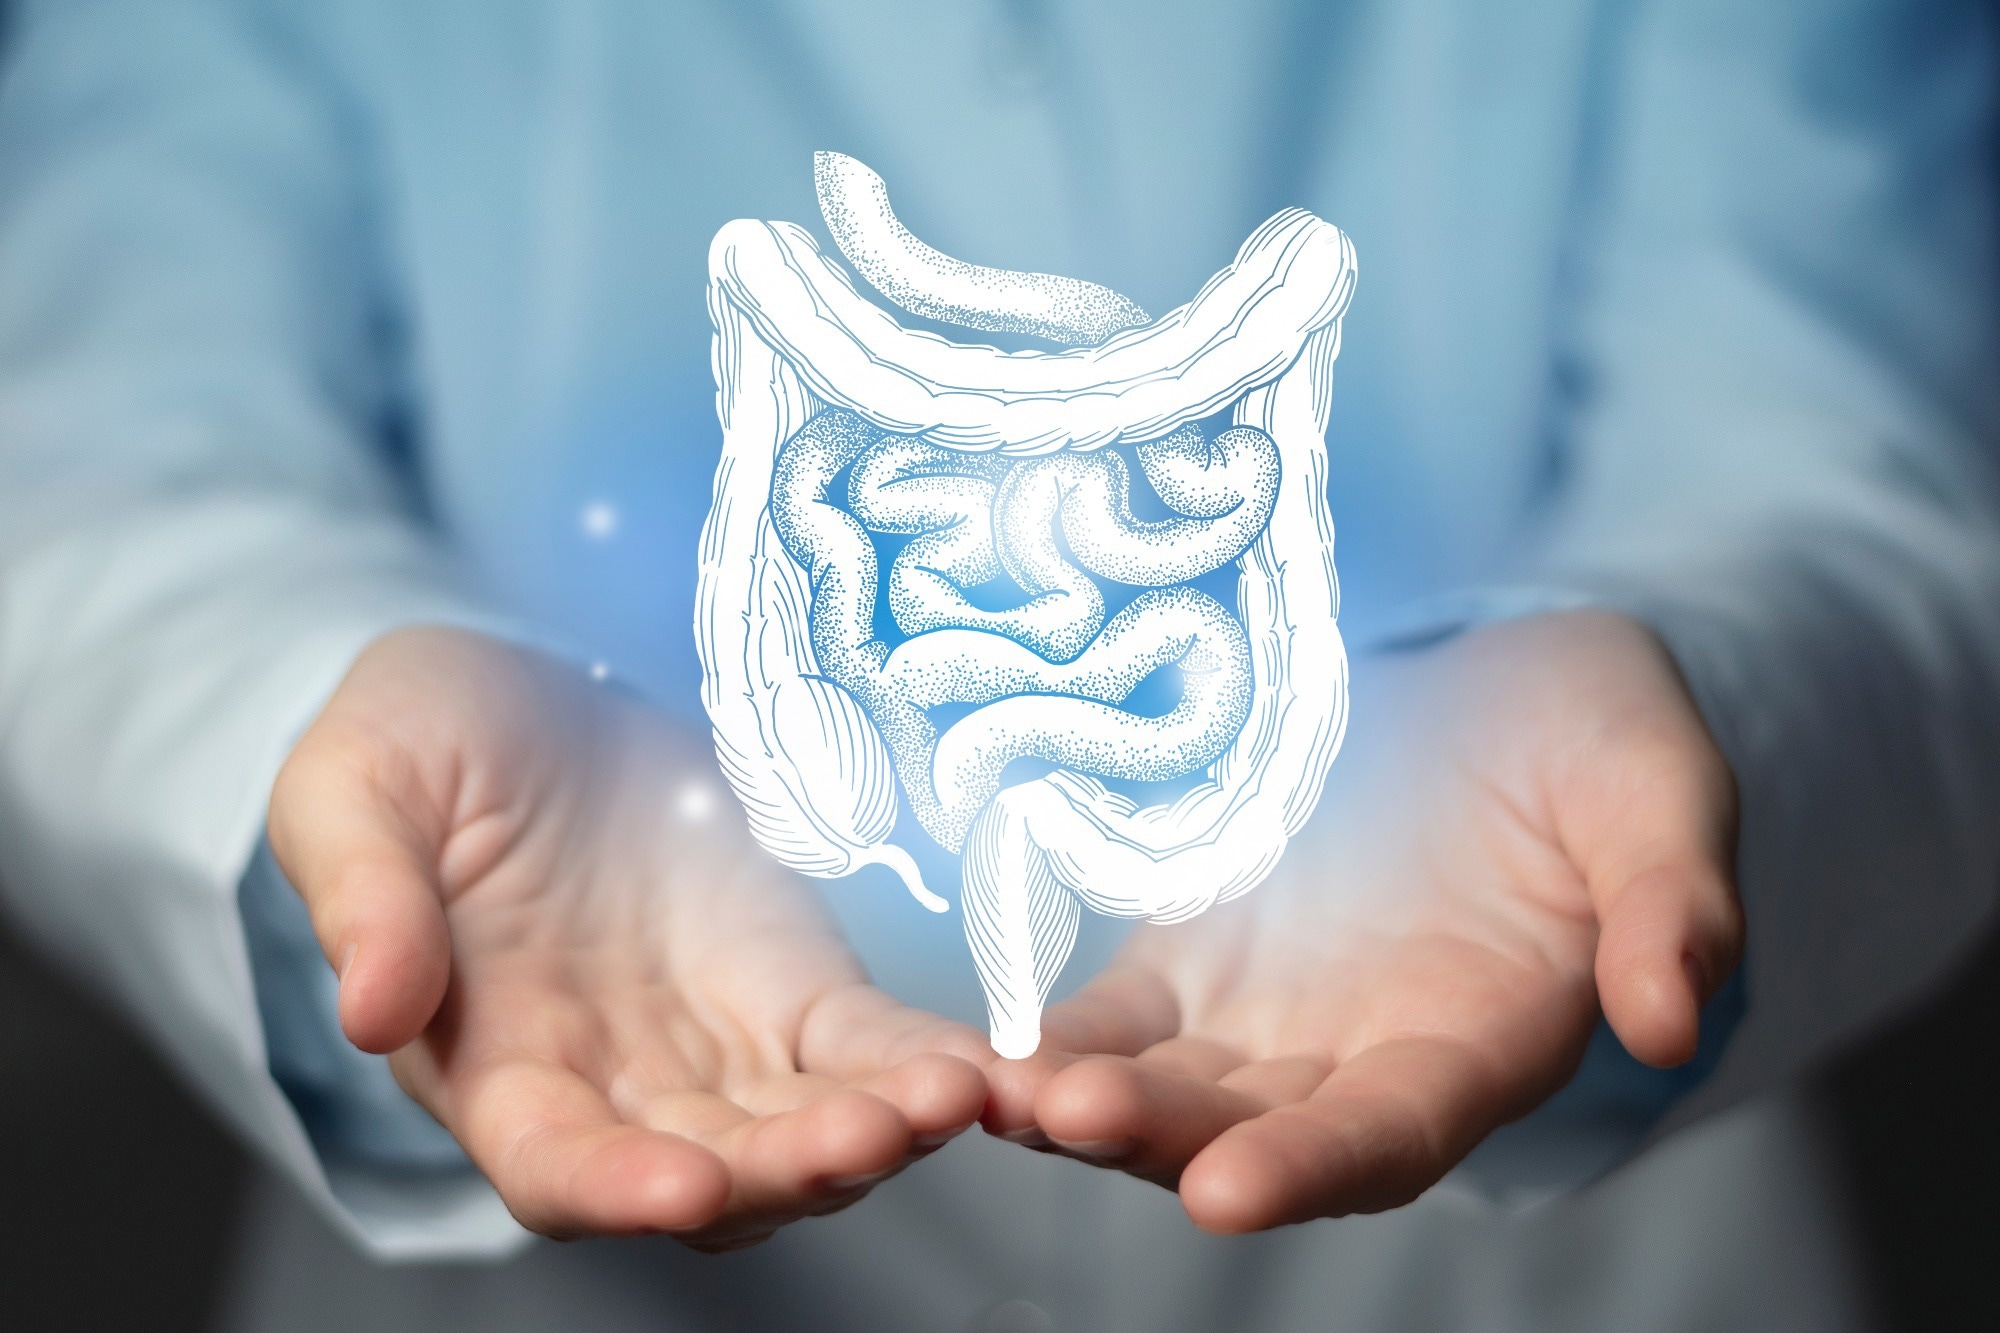 Study: Potential global loss of life expected due to COVID-19 disruptions to organised colorectal cancer screening. Image Credit: mi_viri/Shutterstock.com